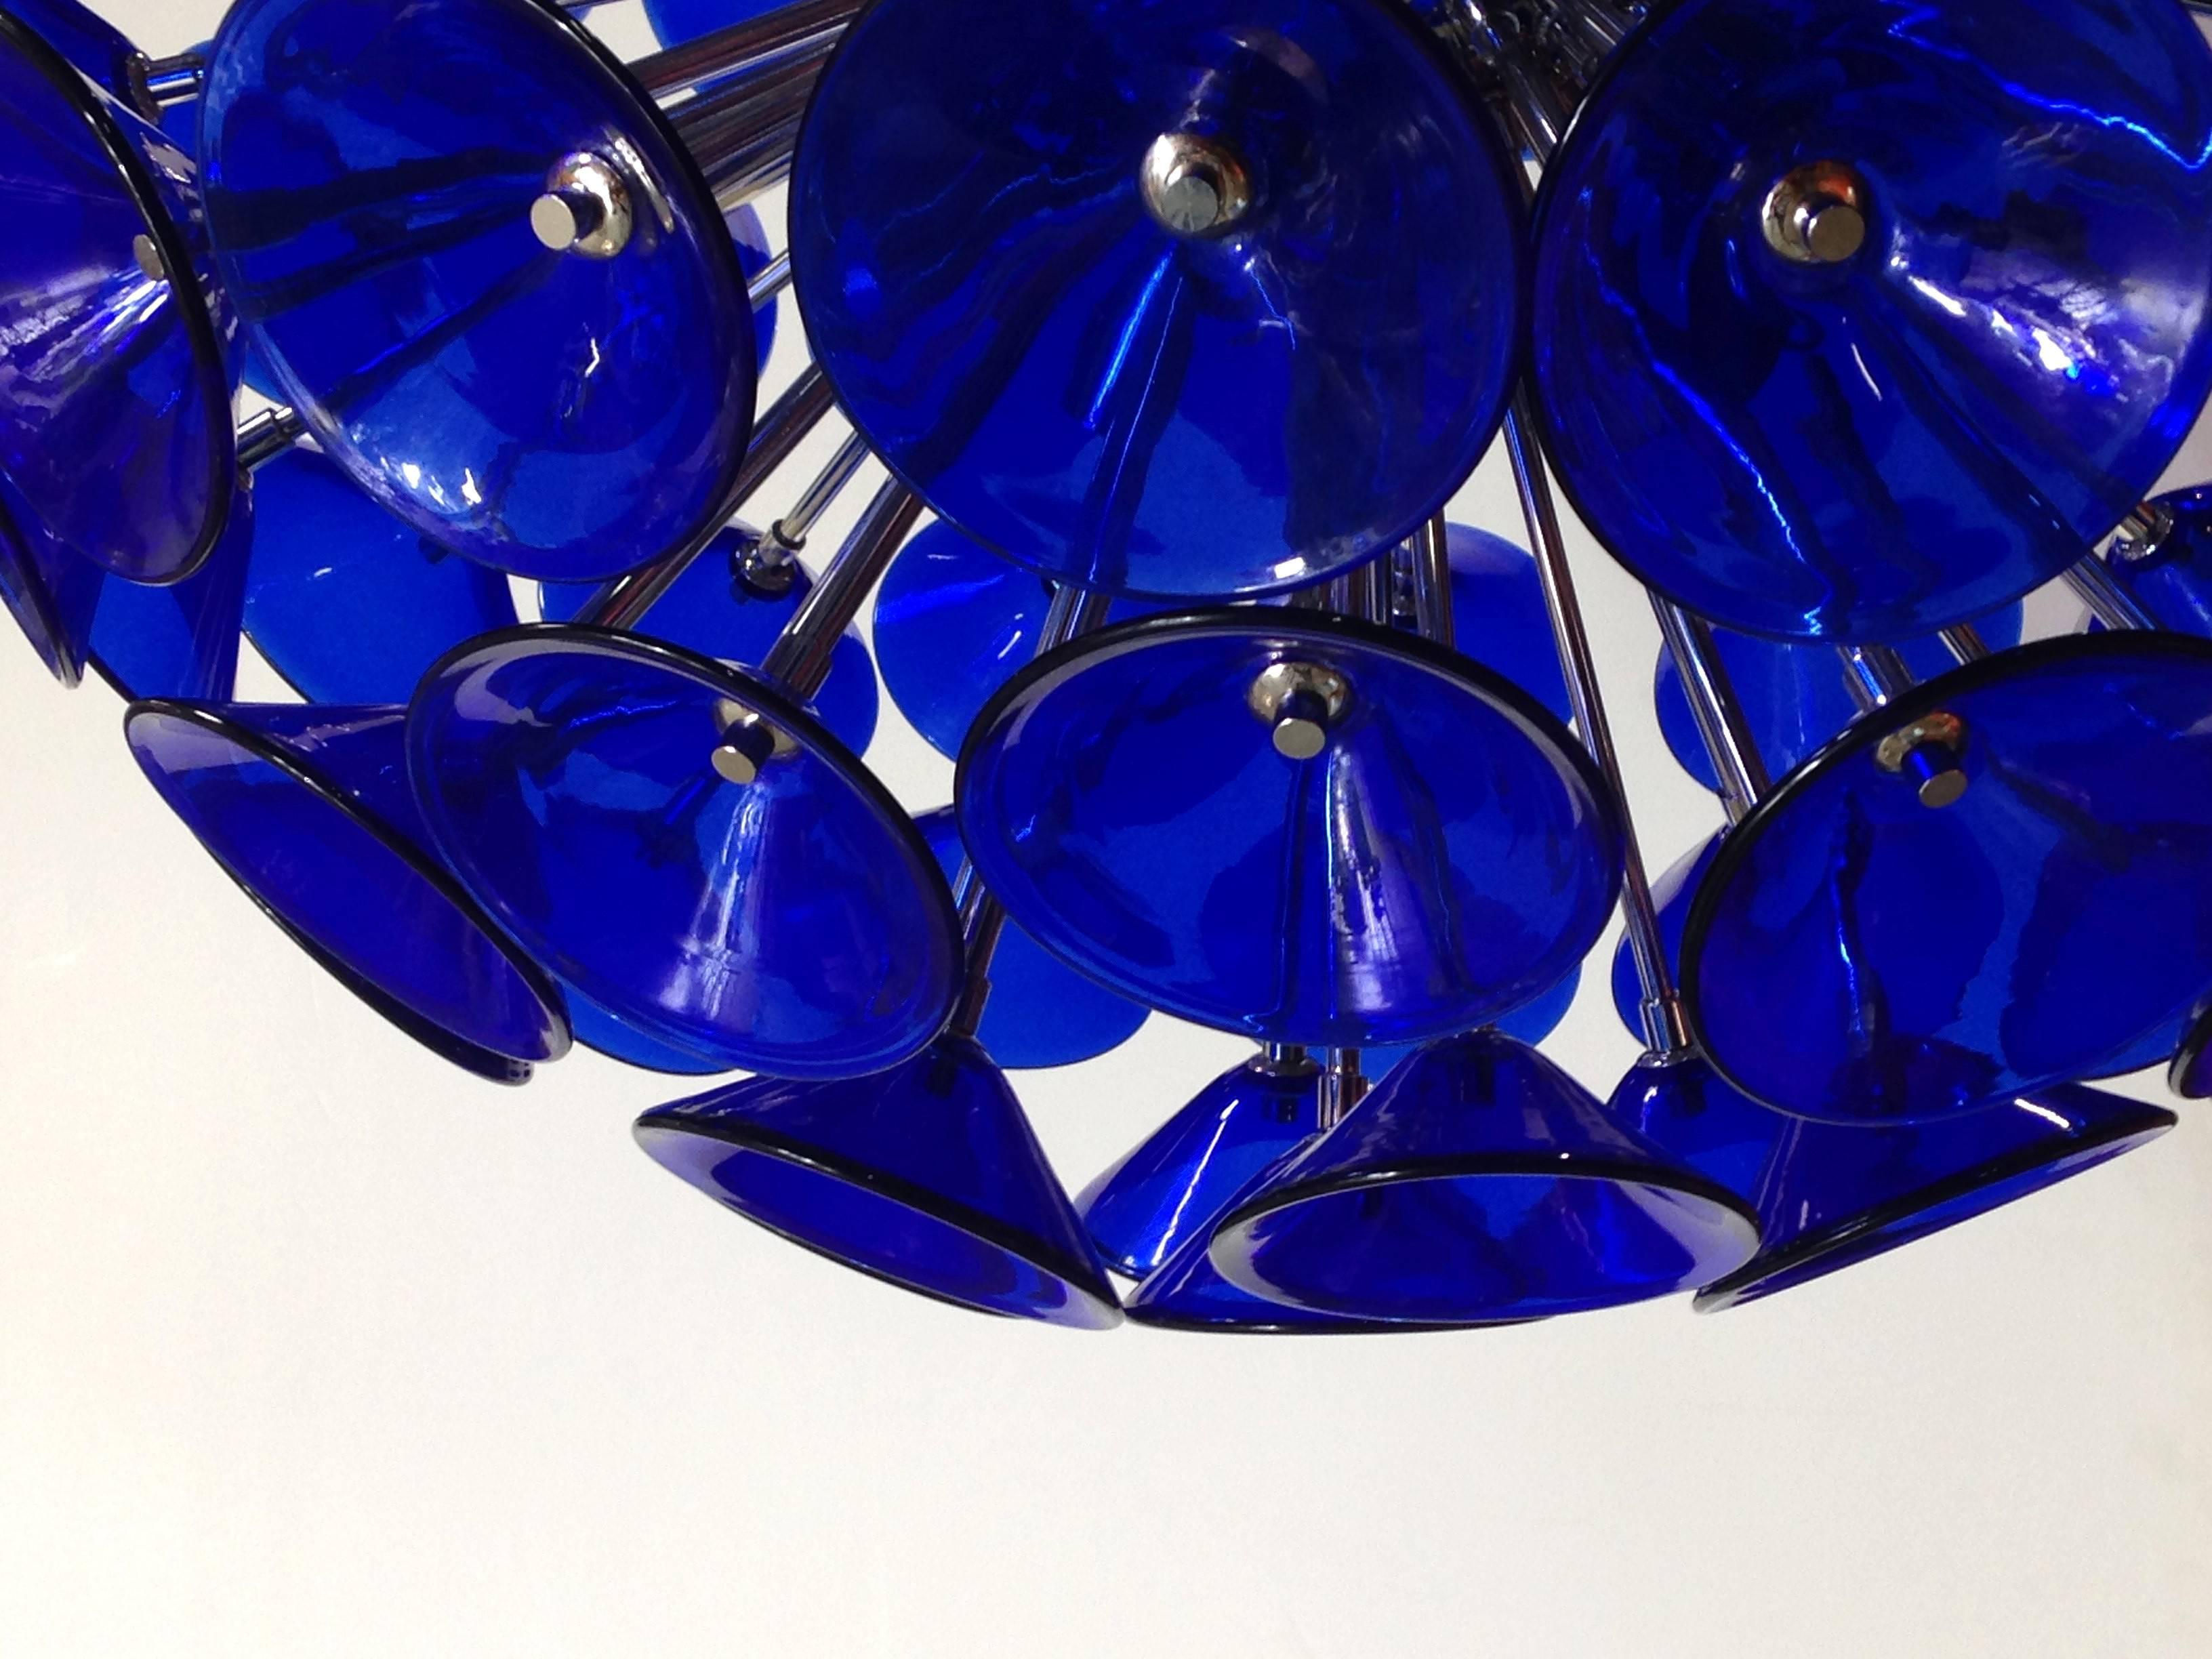 Vintage blue Murano glass trumpets by Vistosi on new chrome metal finish frame by Fabio Ltd
12 lights / E12 type / max 40W each
Diameter: 29 inches / Height: 29 inches plus chain
One in stock in Palm Springs
Order Reference #: VBTM

